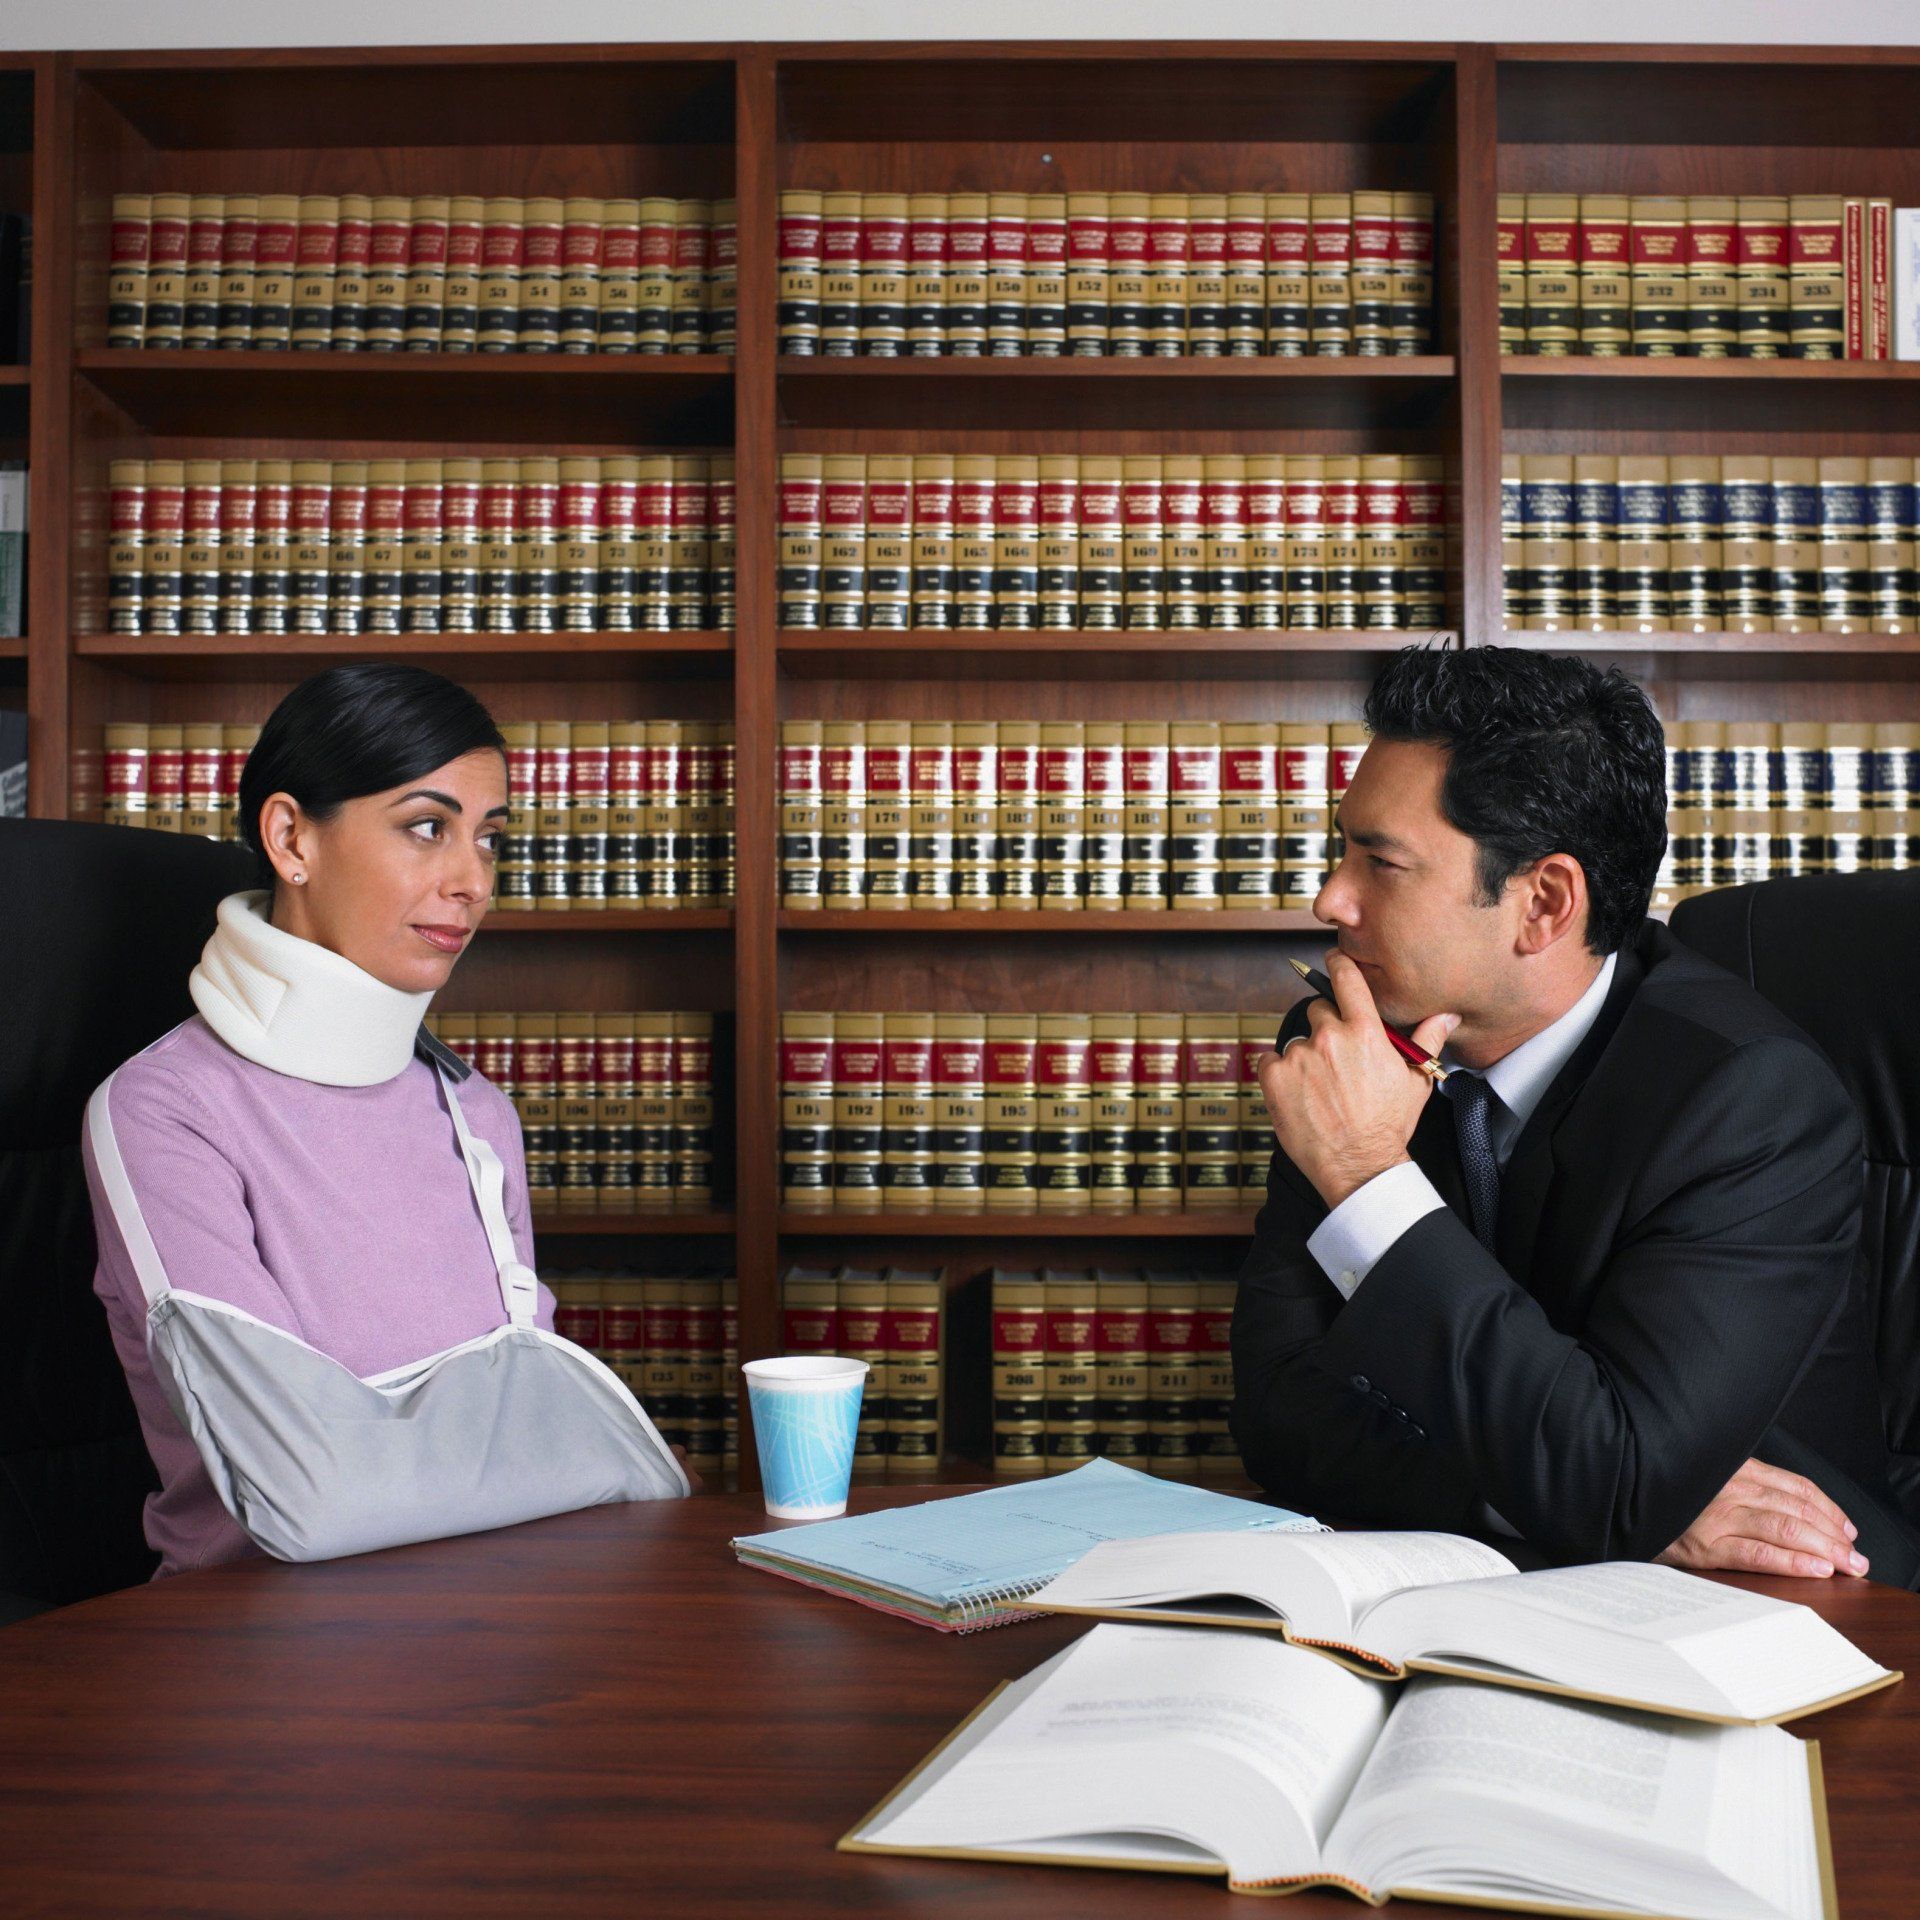 personal injury law attorneys